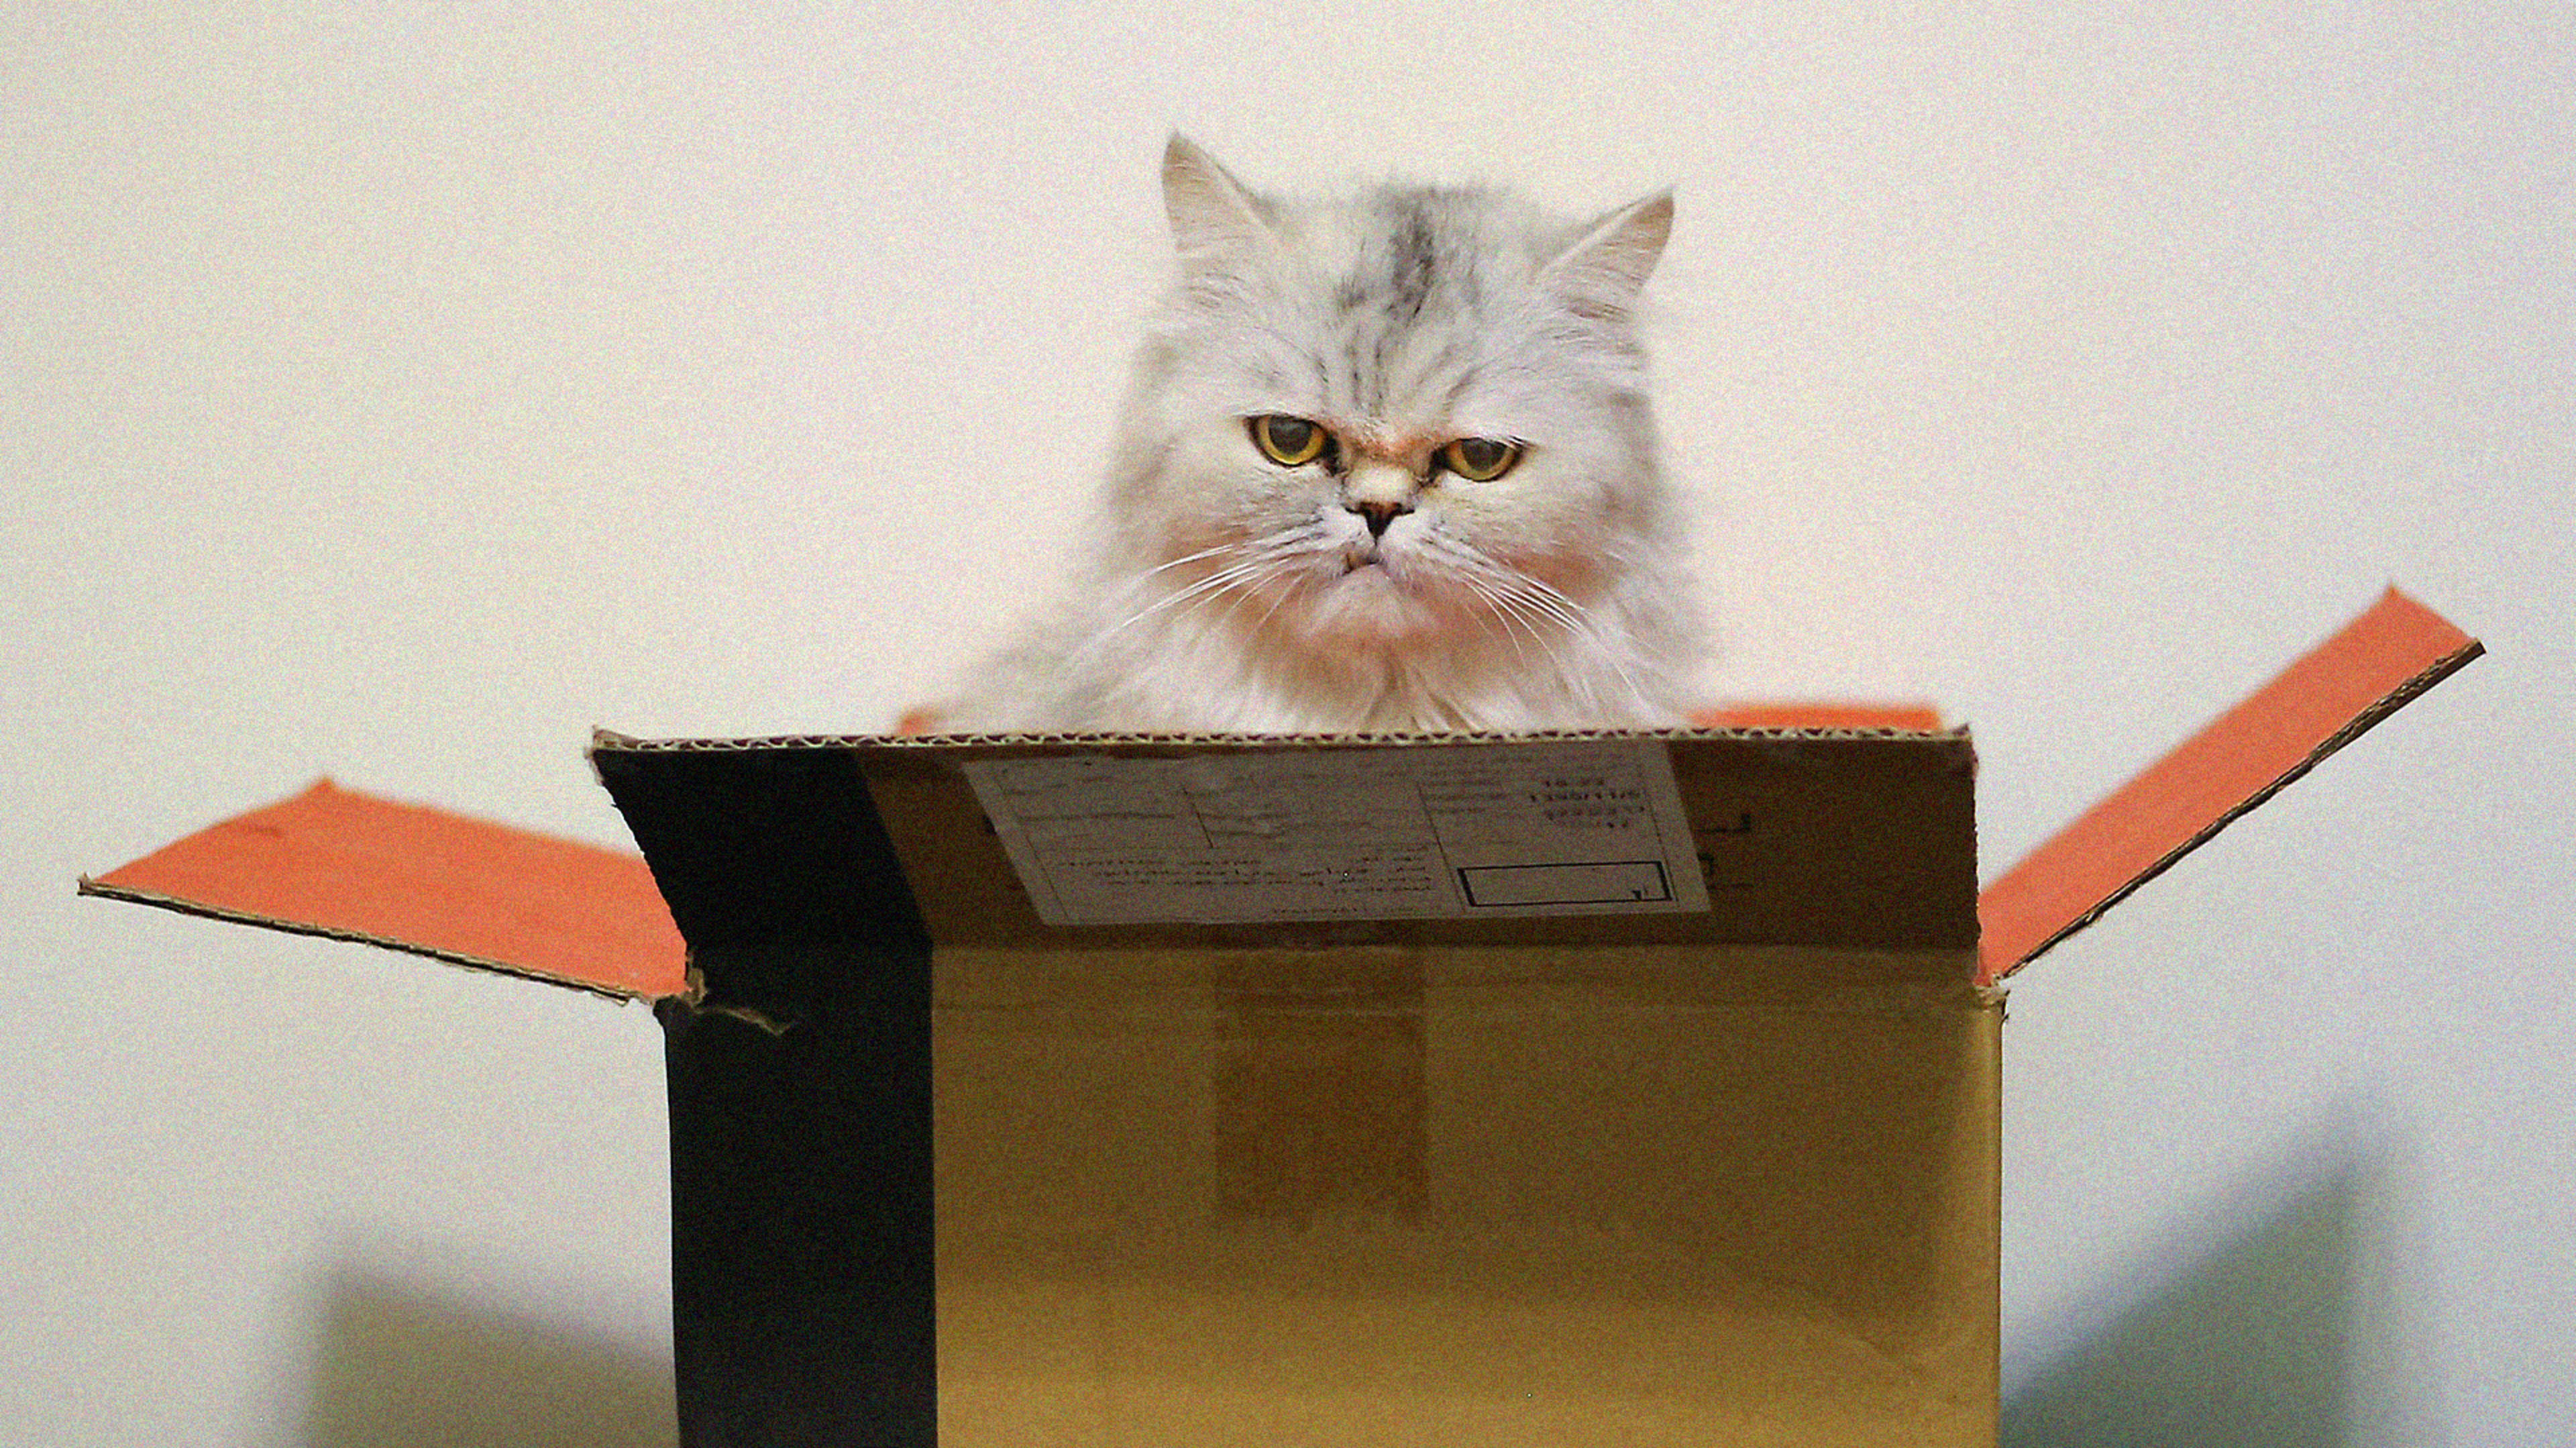 Amazon knows you have too many boxes, so it wants you to make cat condos and robot costumes